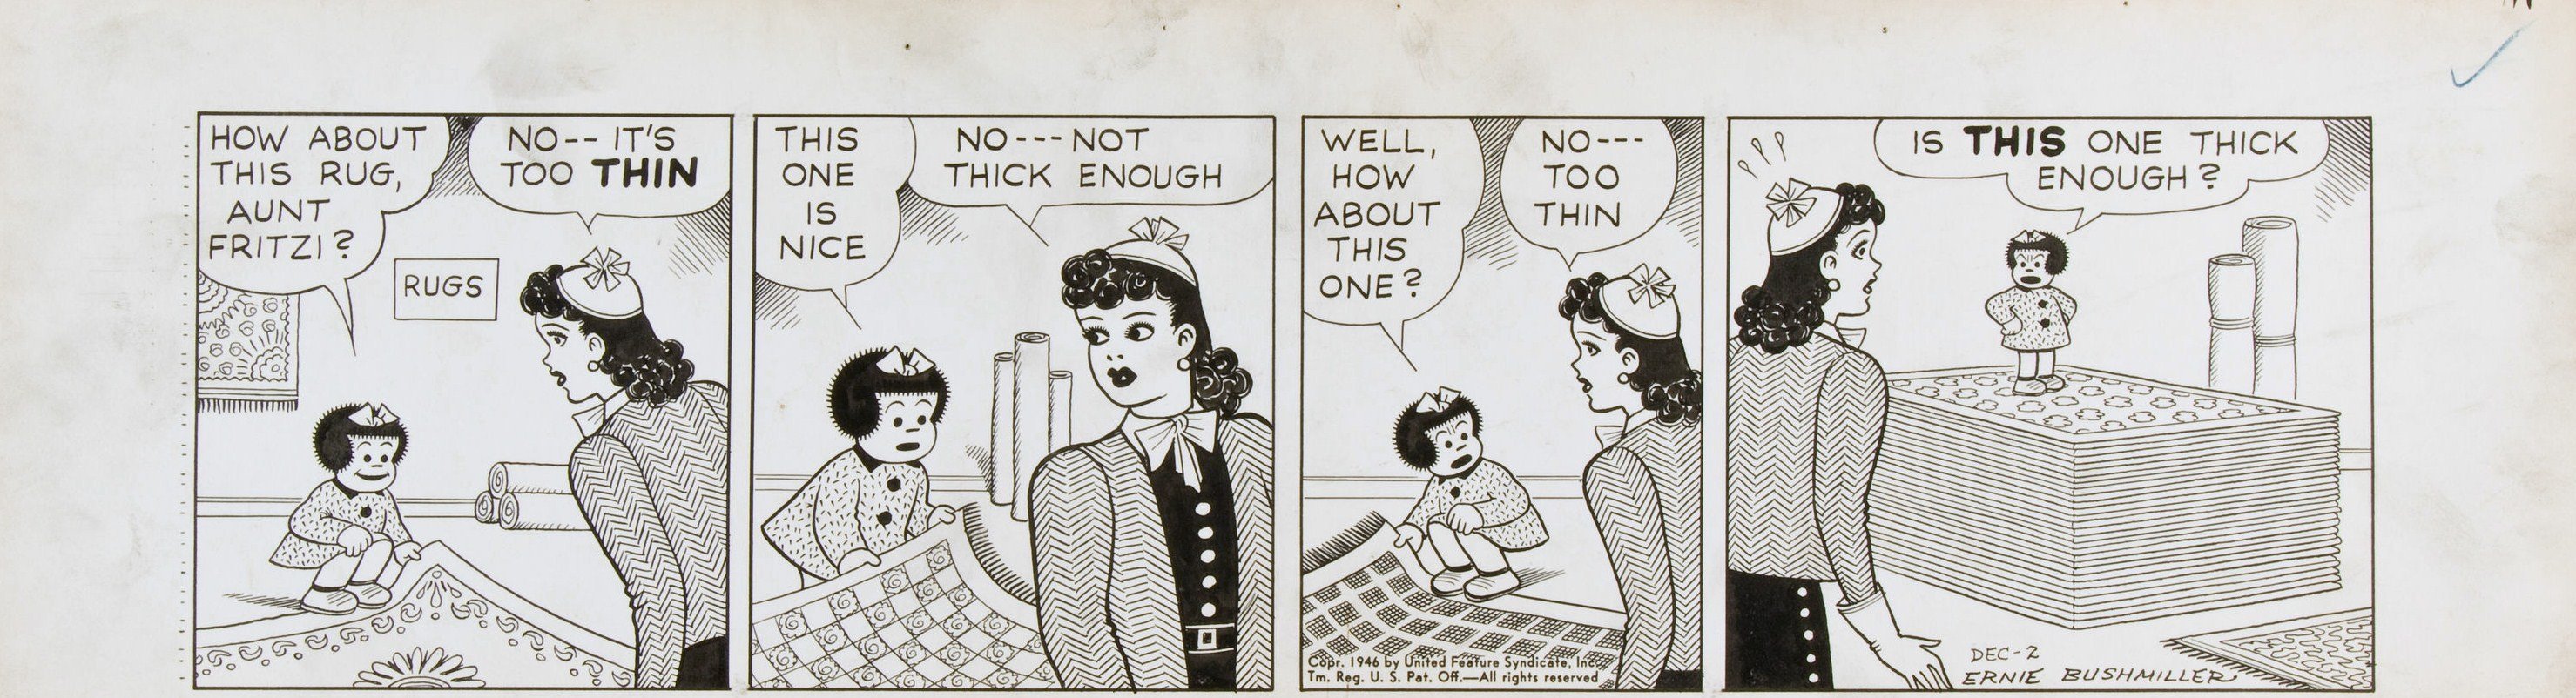 Bums, Beatniks and Hippies, Artists and Con Artists by Ernie Bushmiller